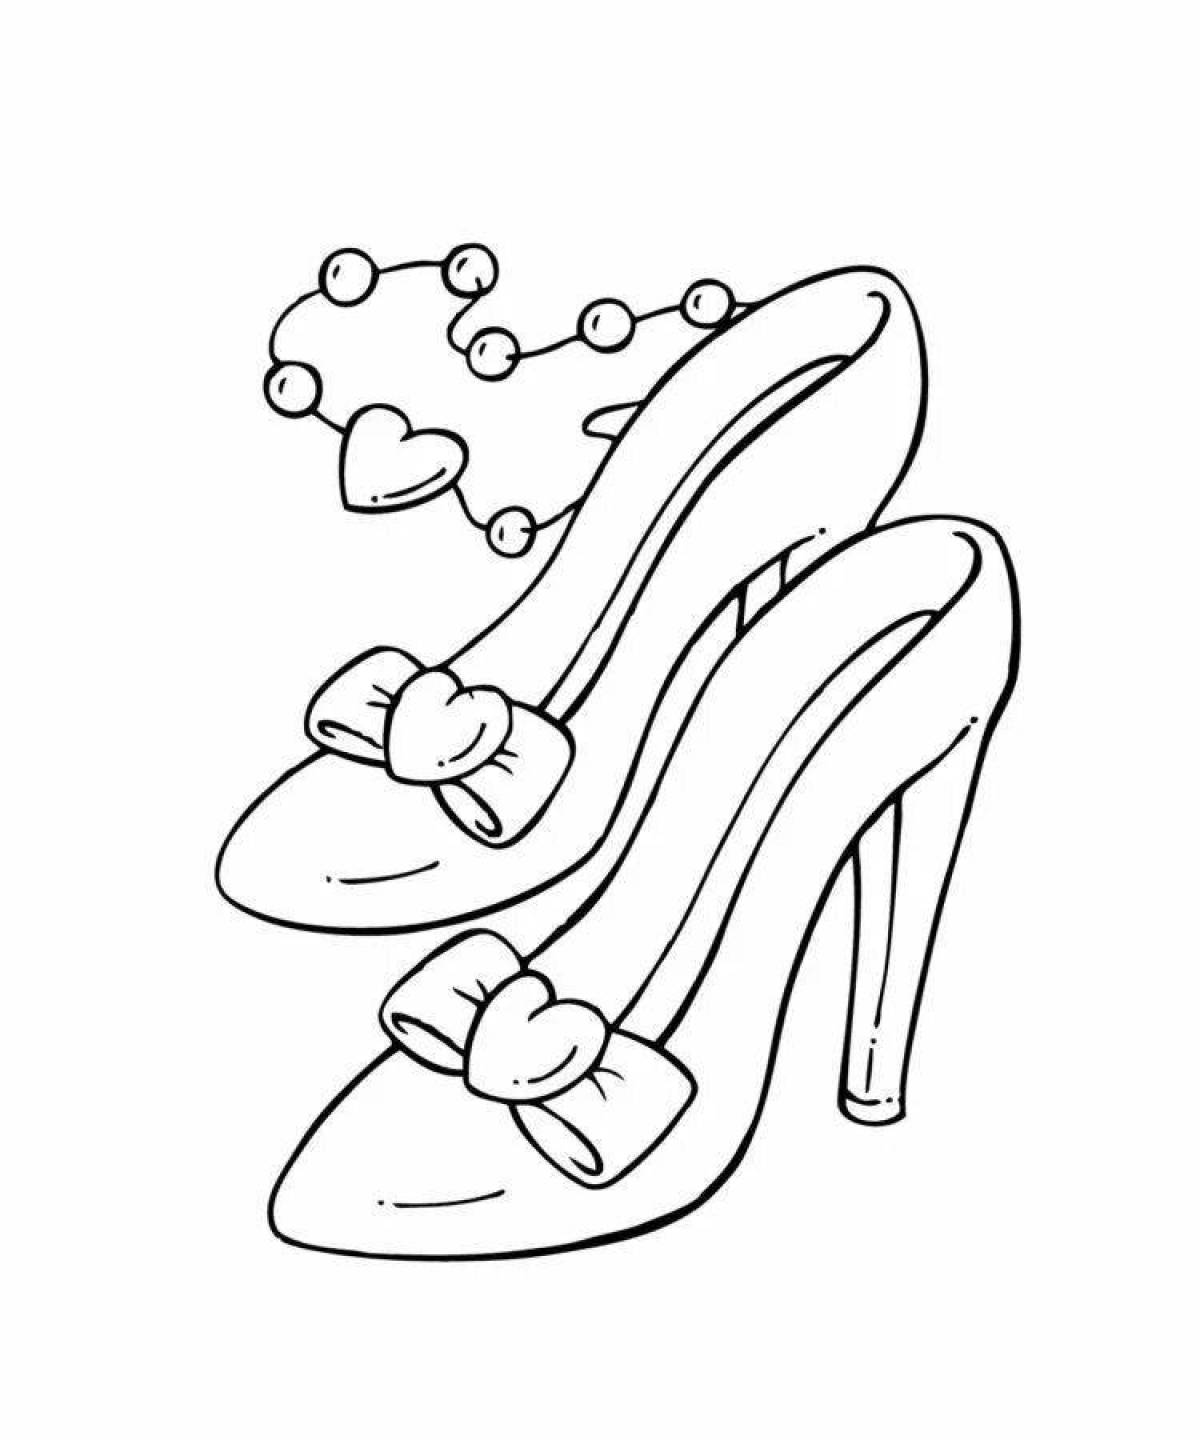 Fairy shoes coloring page for children 3-4 years old